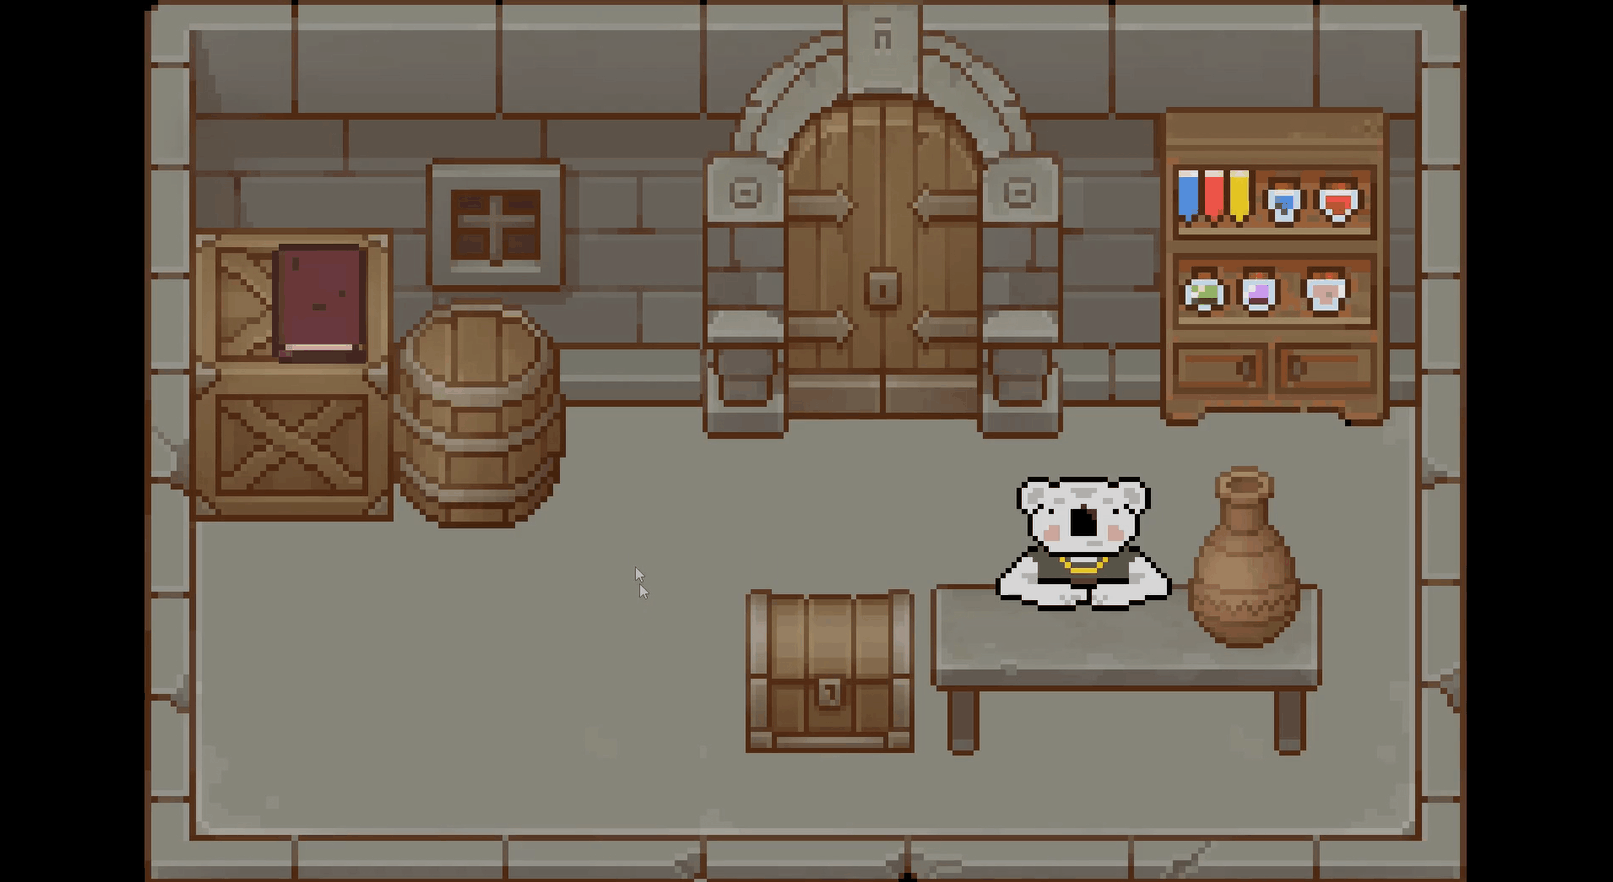 An animated gif capturing the gameplay. Its overall look consists of pixel art and vibrant colors. At first, it shows the inside of a shop with a cartoony adult koala at the counter. Then, the player enters a dungeon and starts controlling a little koala with a bow. It enters a door to a new room and an enemy approaches.